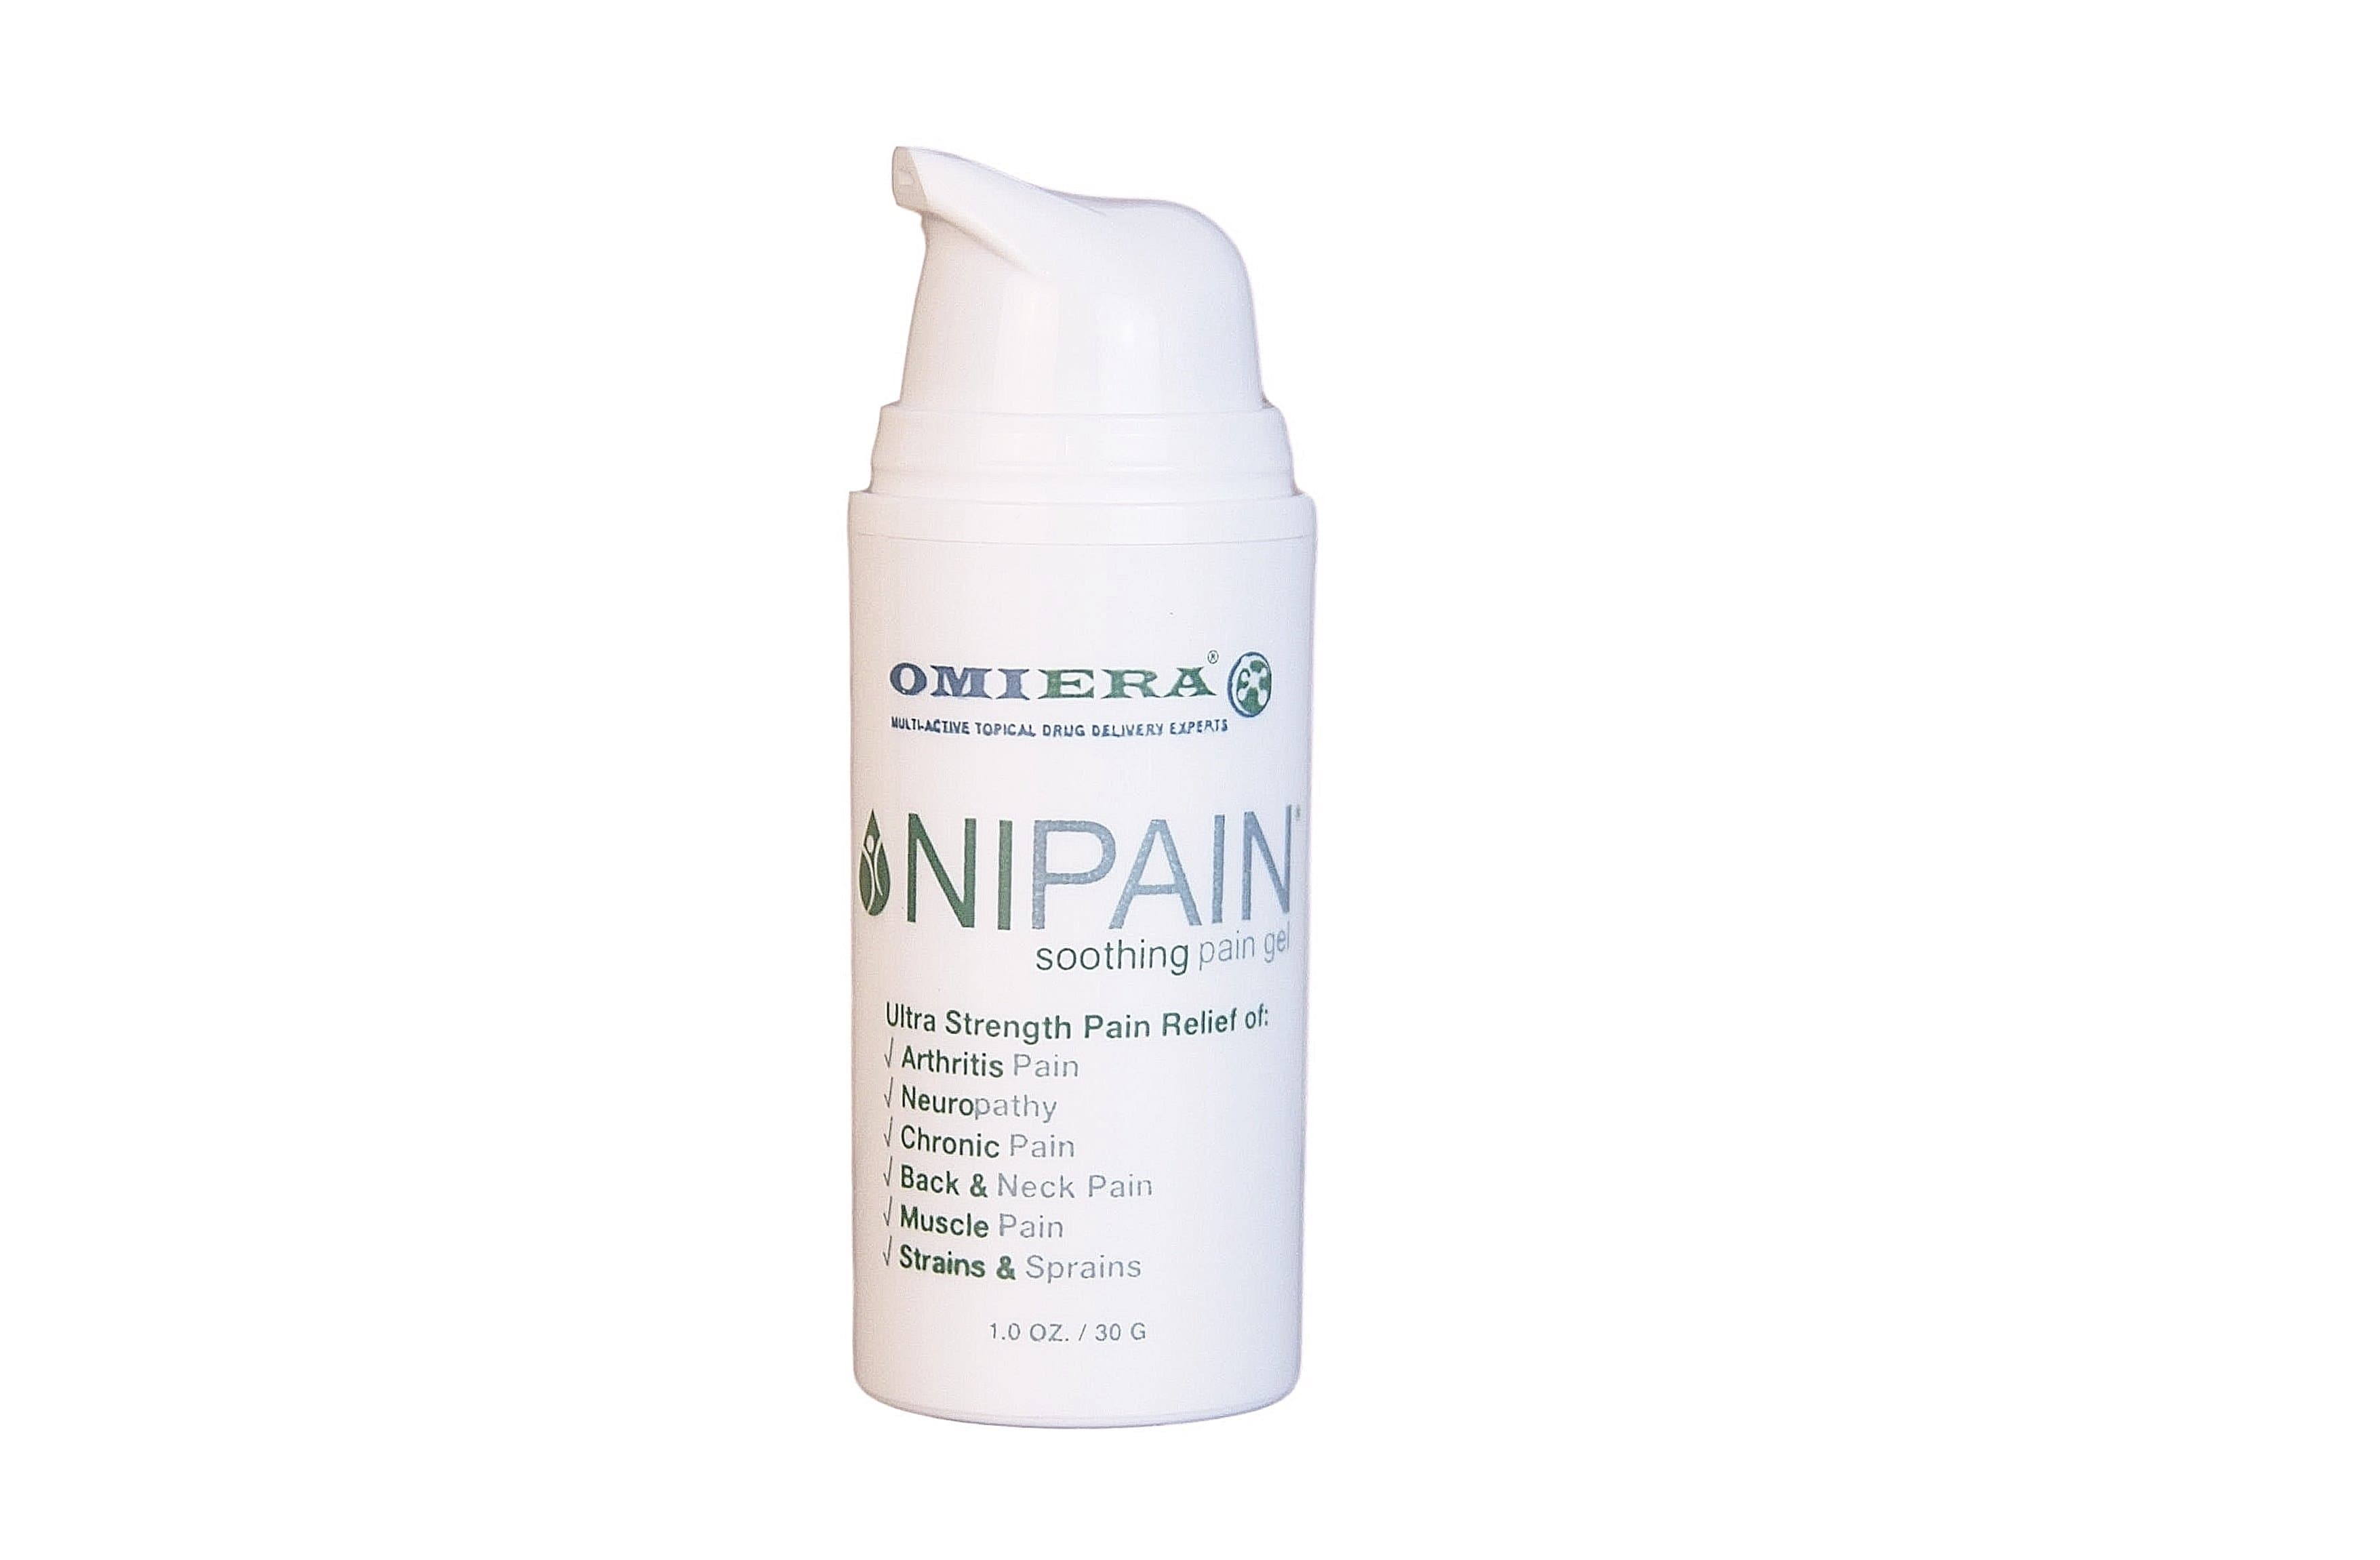 OTC Topical Products for Back Pain Relief: Cream And Gels